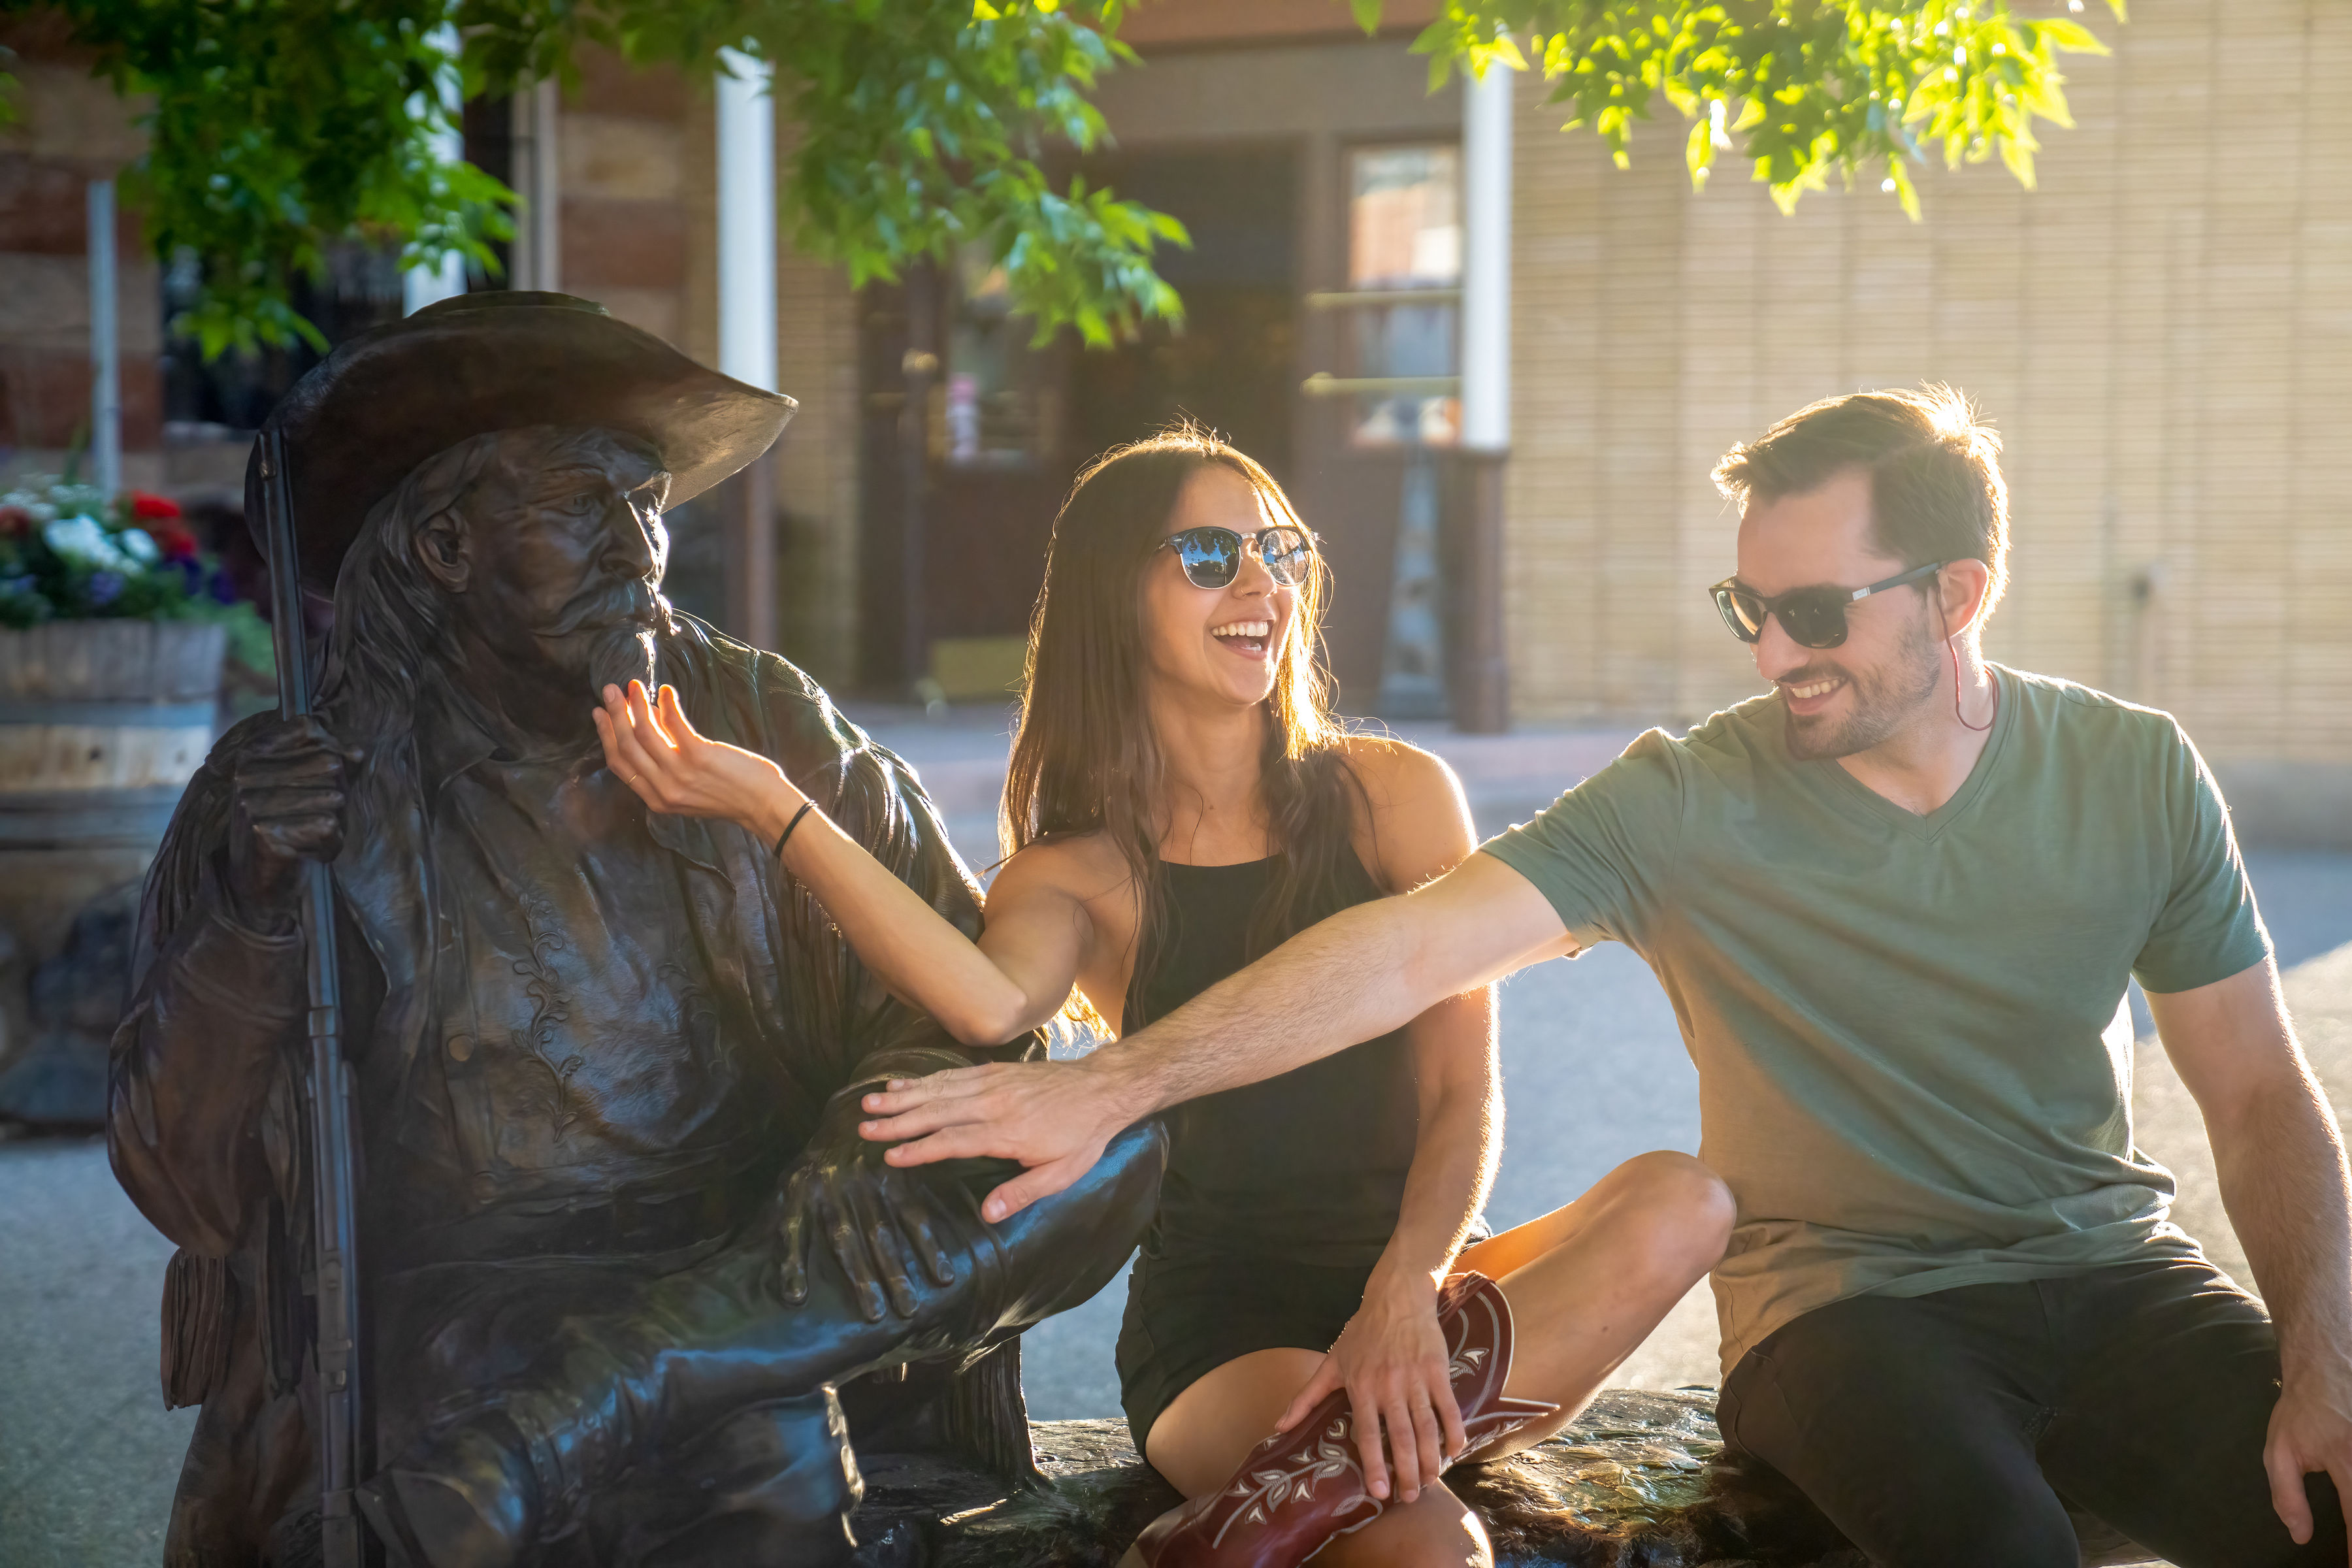 A man and woman sit next to the statue of Buffalo Bill Cody and playfully tug his beard